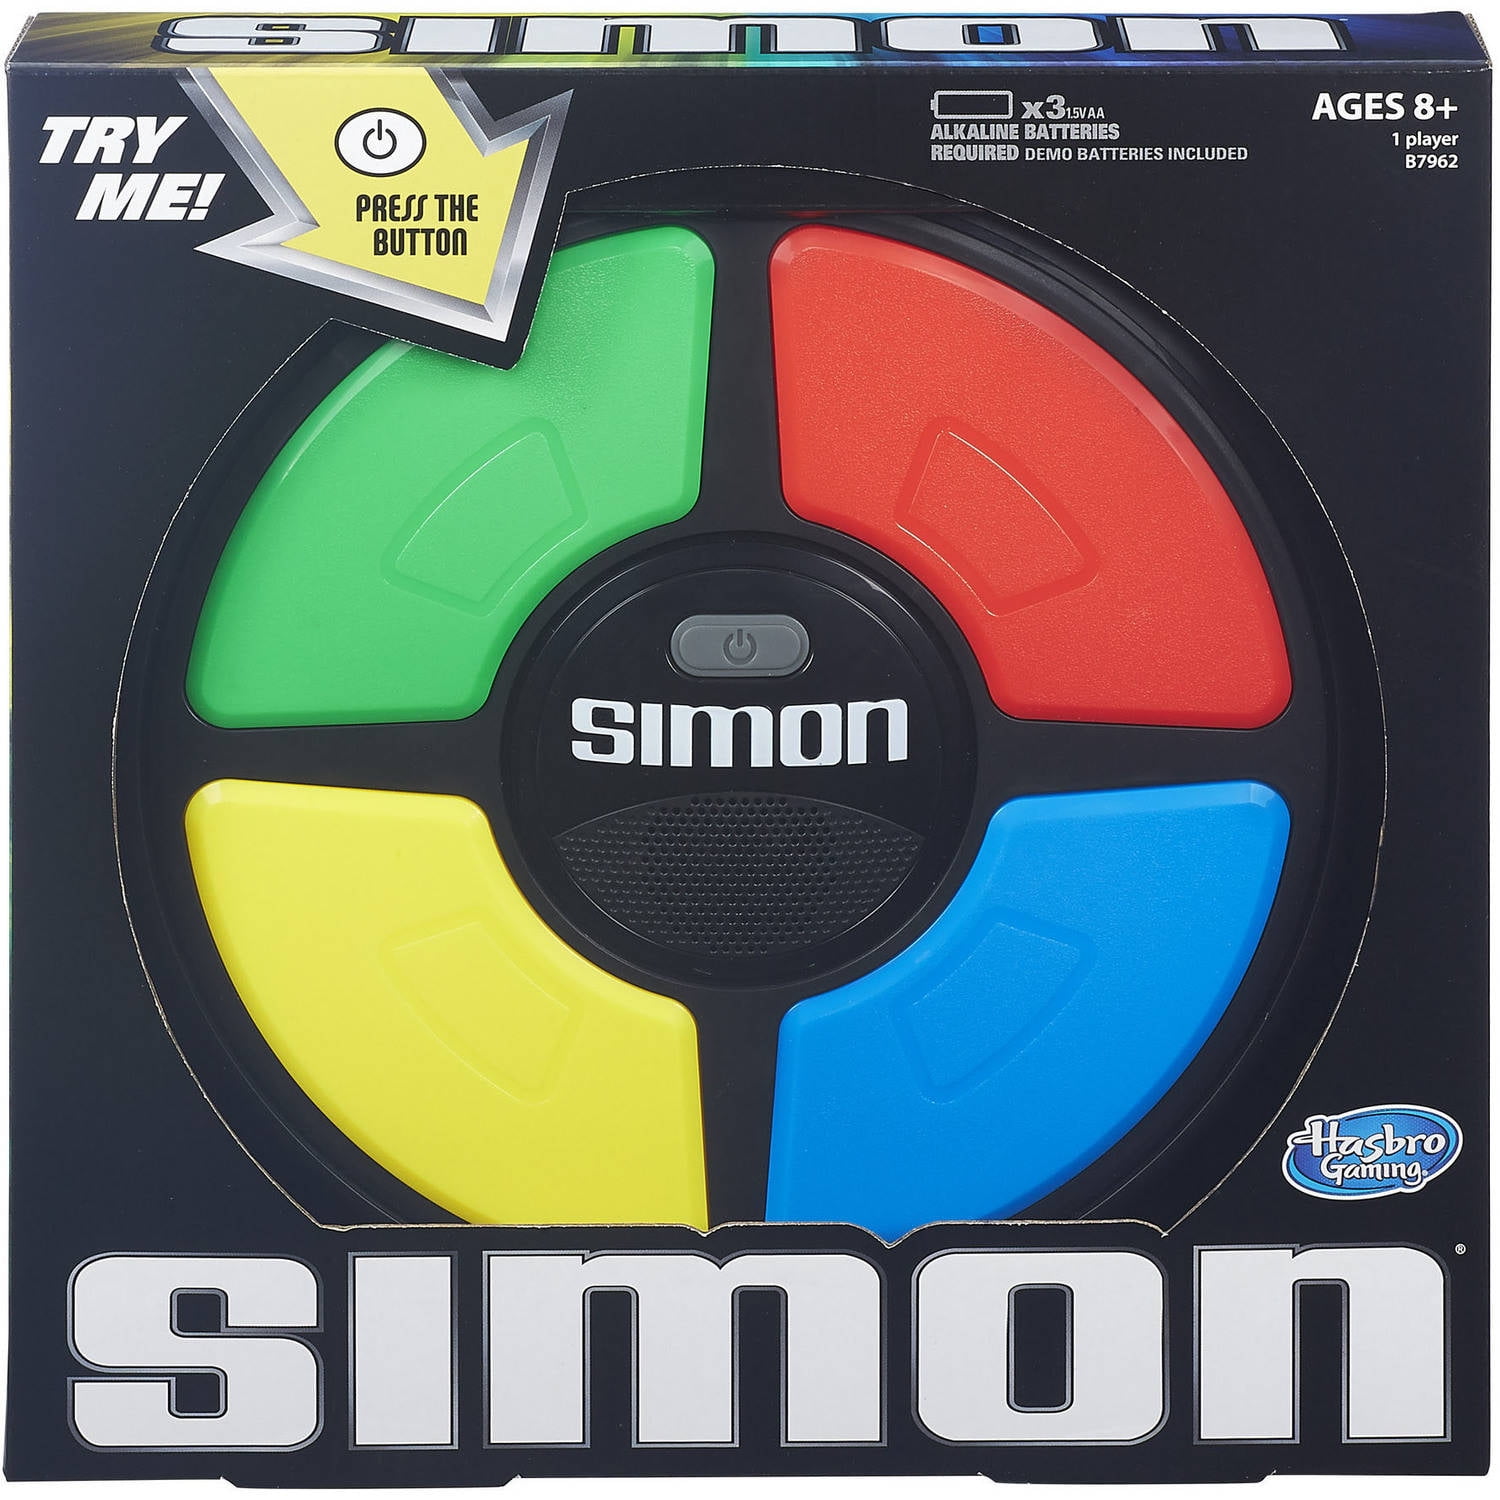 Simon Electronic Memory Game Hasbro Toy Tested Says Handheld Air Works Touch 